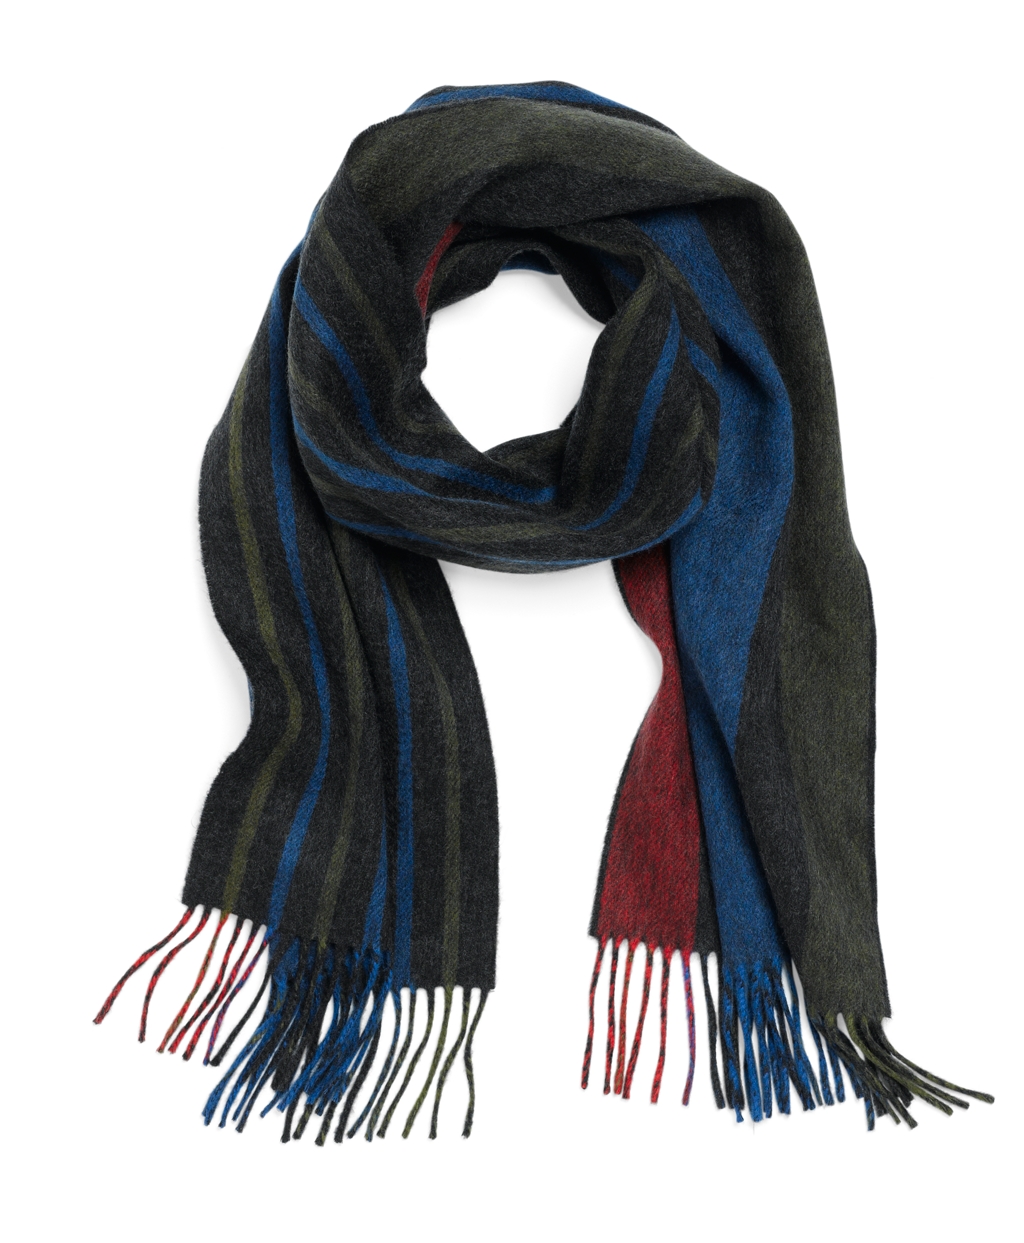 Lyst - Brooks Brothers Cashmere Double-faced Stripe Scarf in Blue for Men